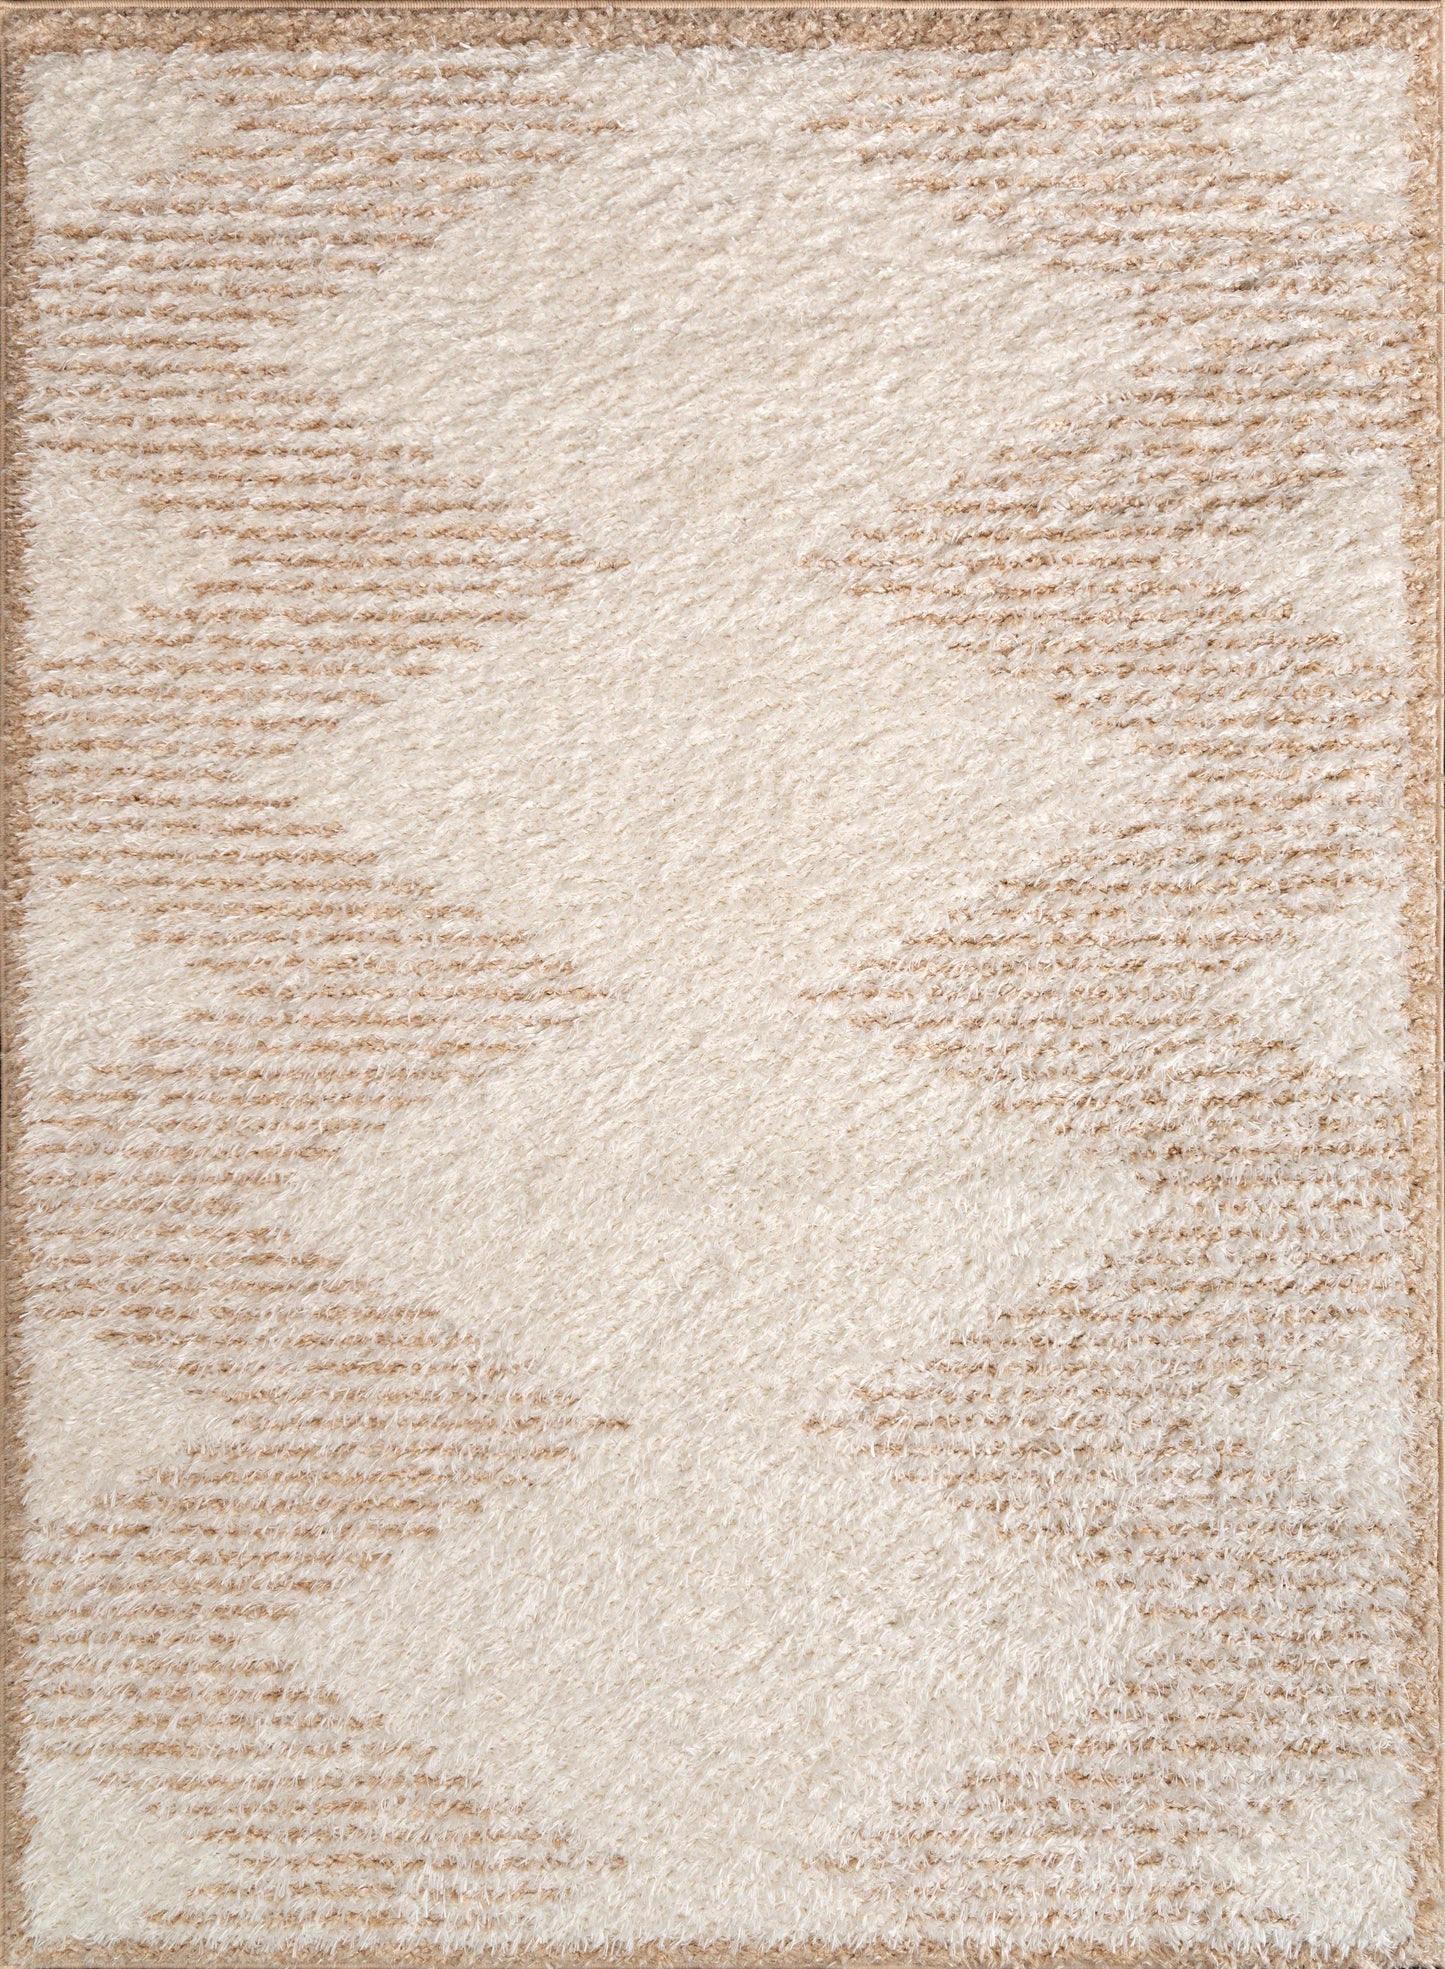 cream beige abstract fluffy thick shaggy area rug for living room bedroom 2x5, 3x5 Runner Rug, Entry Way, Entrance, Balcony, Bedside, Home Office, Table Top